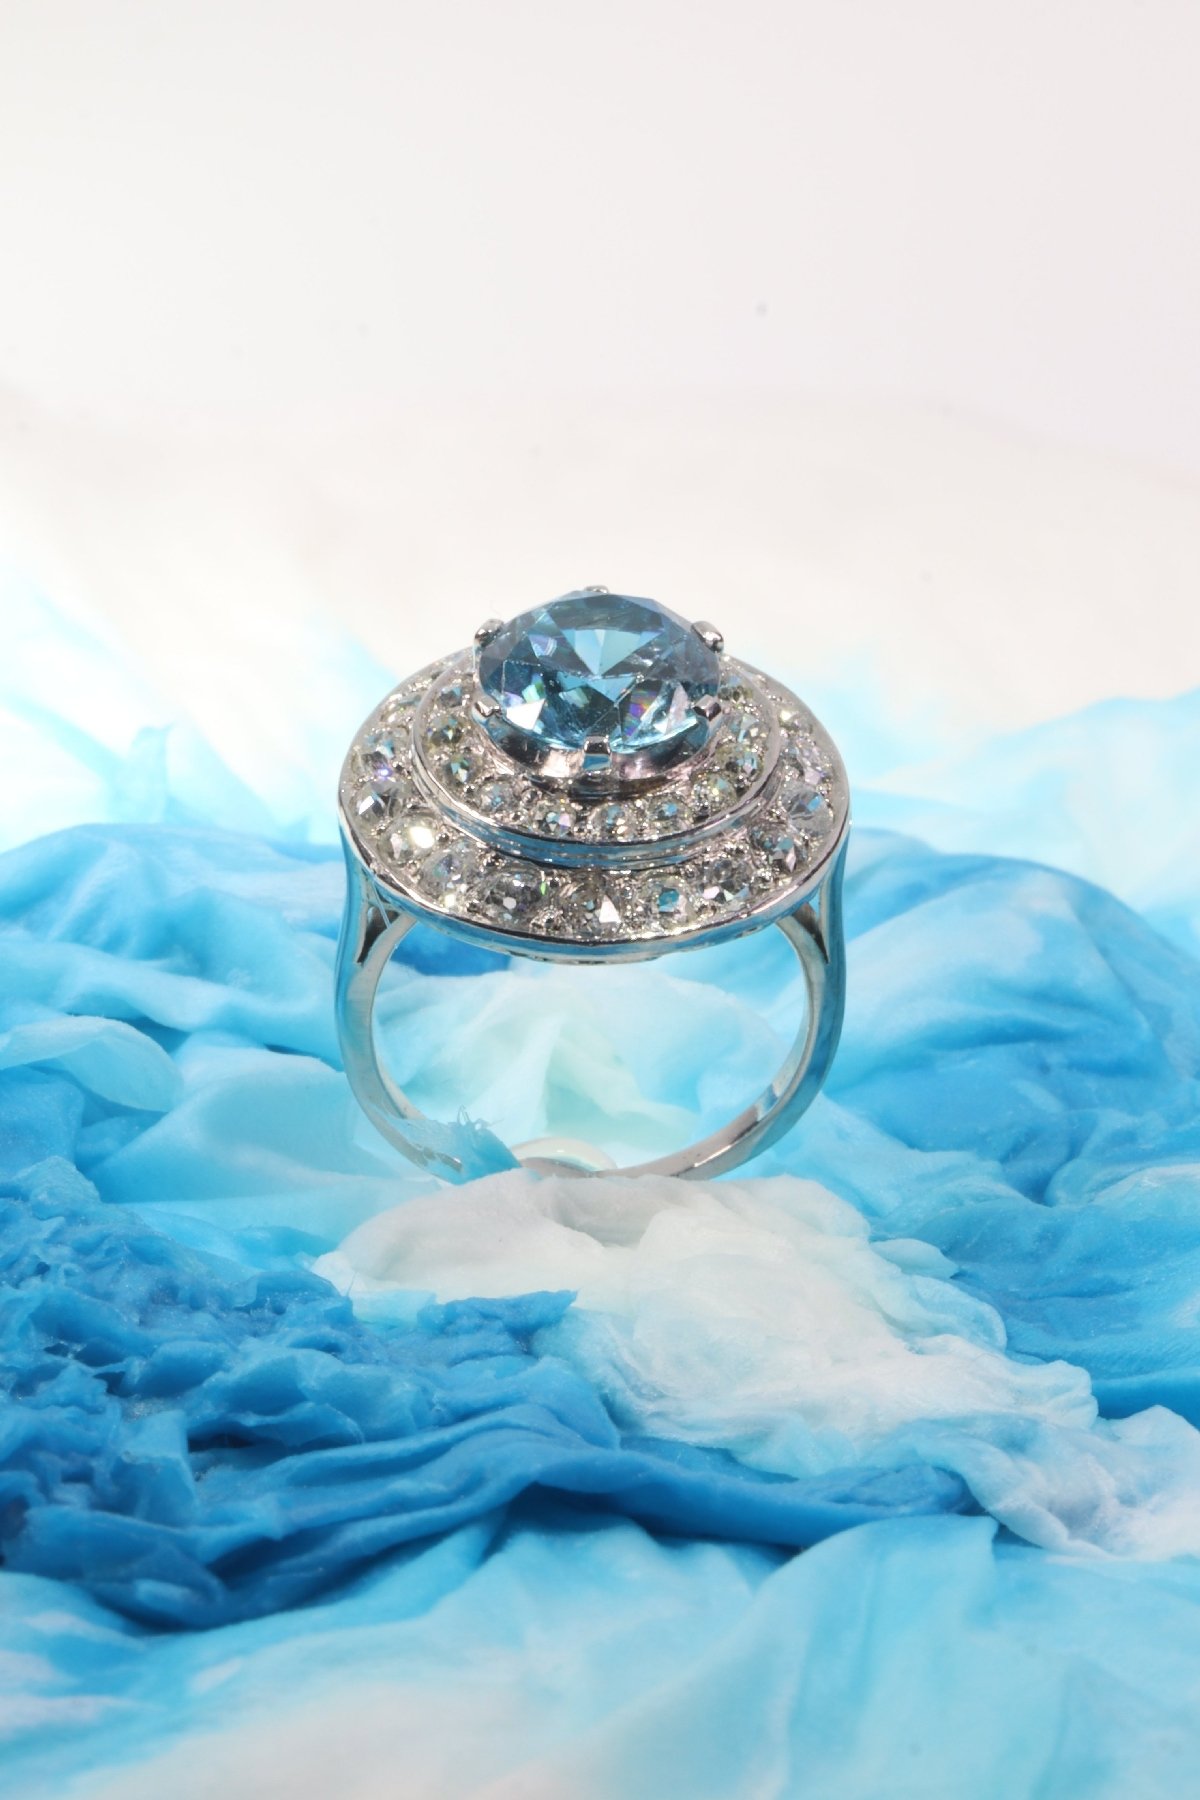 Click the picture to get to see this Vintage Fifties ring diamond loaded with a big starlite.